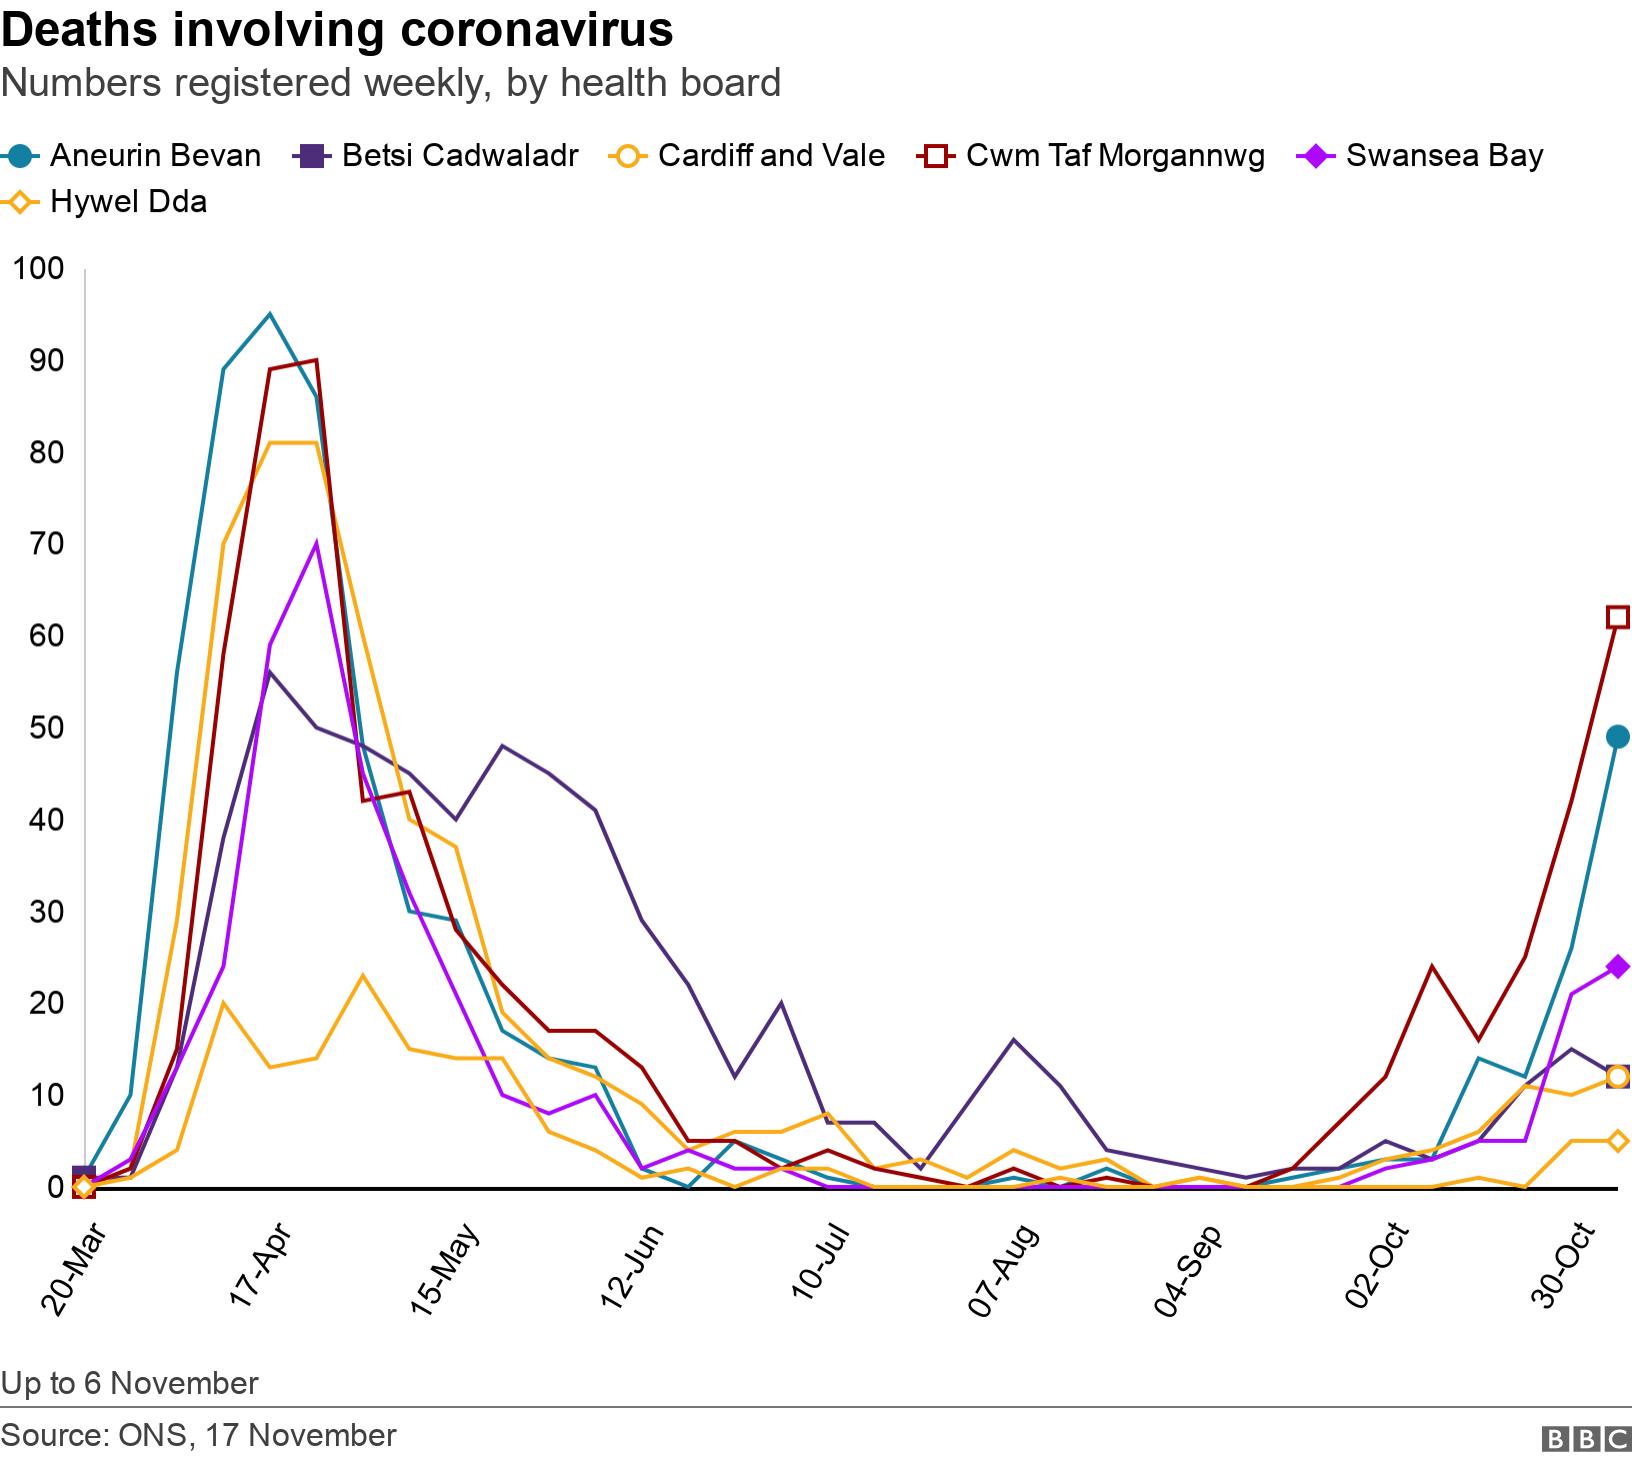 Deaths involving coronavirus. Numbers registered weekly, by health board. Up to 6 November.